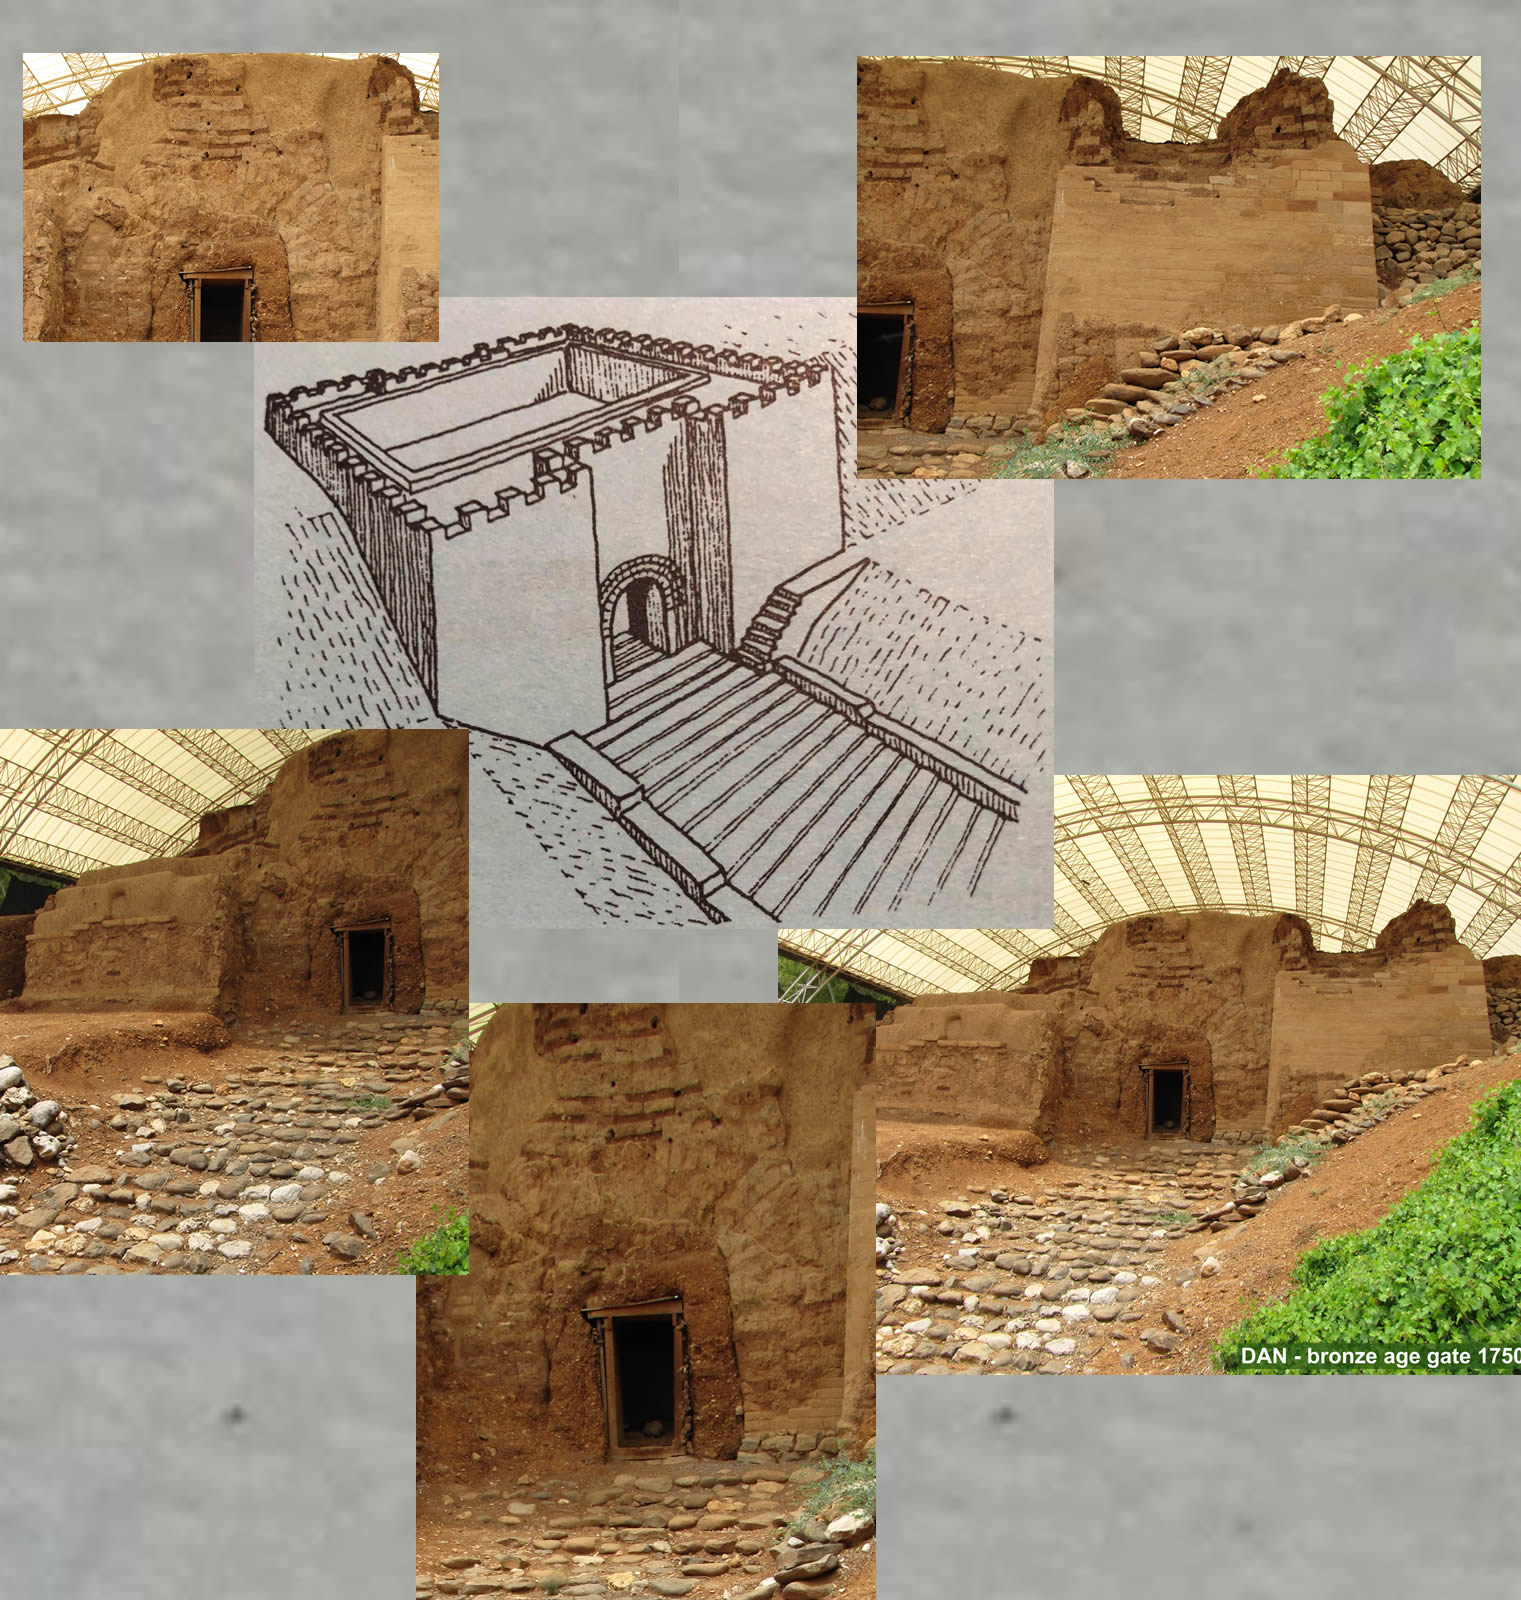 Diagram detailing Bronze Age Gate at Dan with drawing and photos